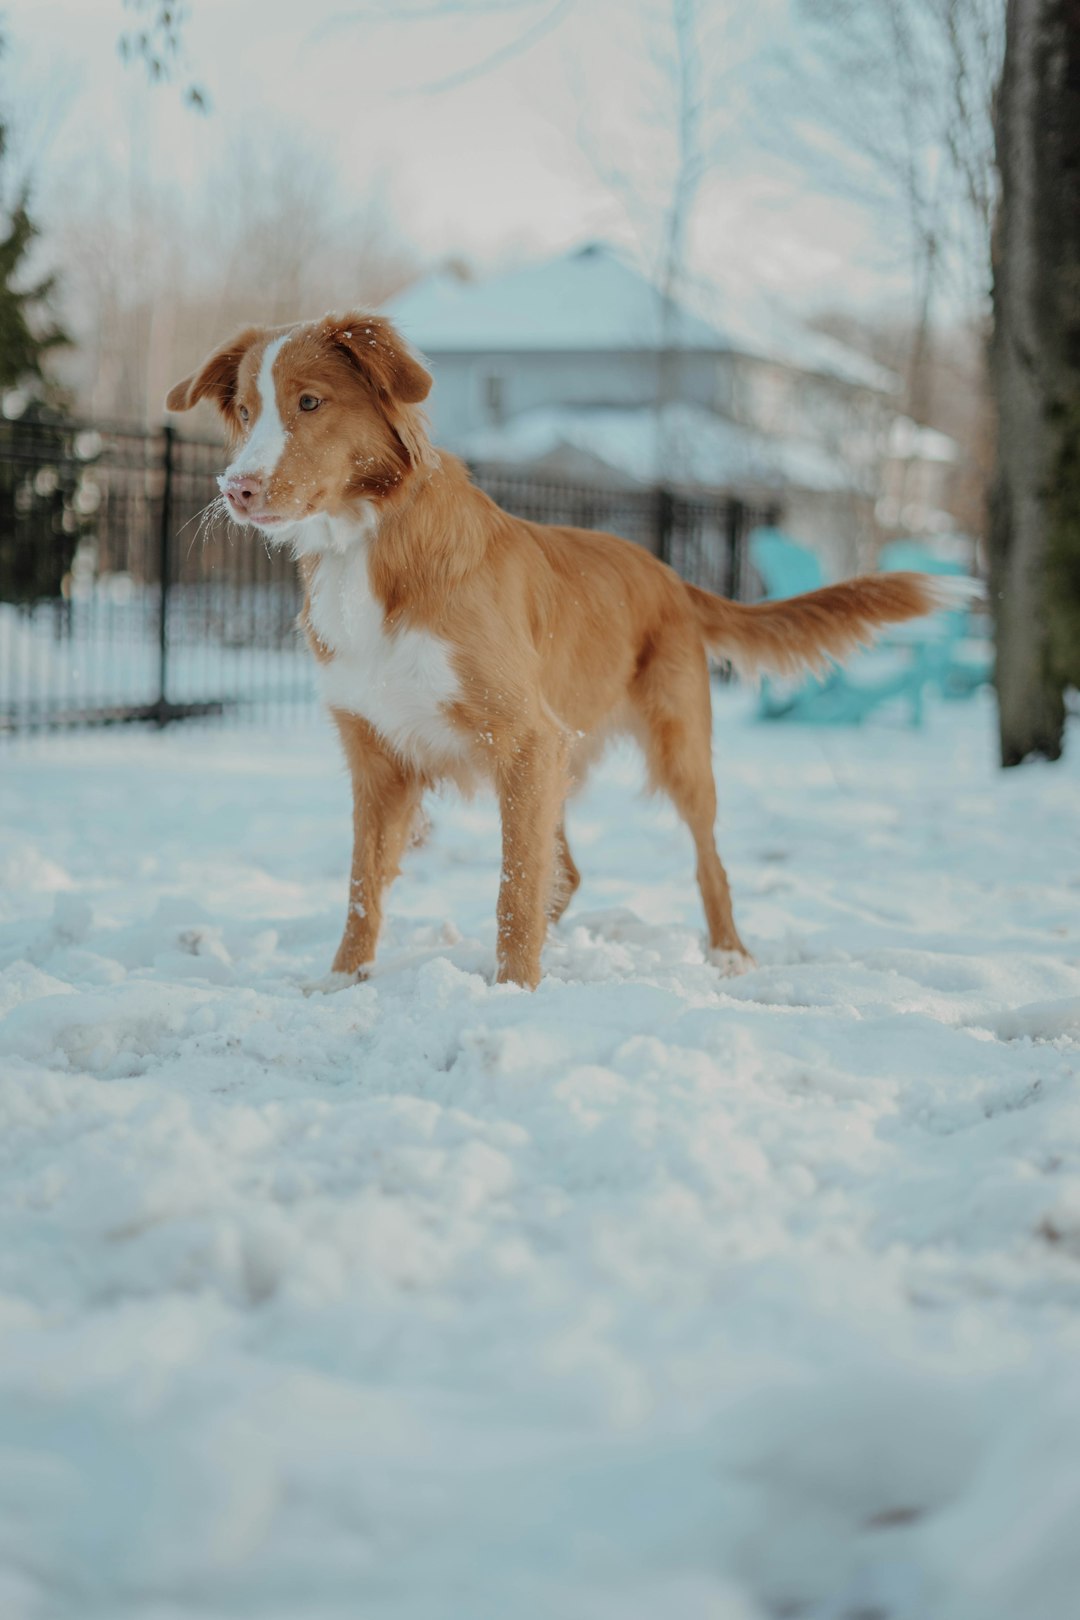 brown and white short coated dog running on snow covered ground during daytime